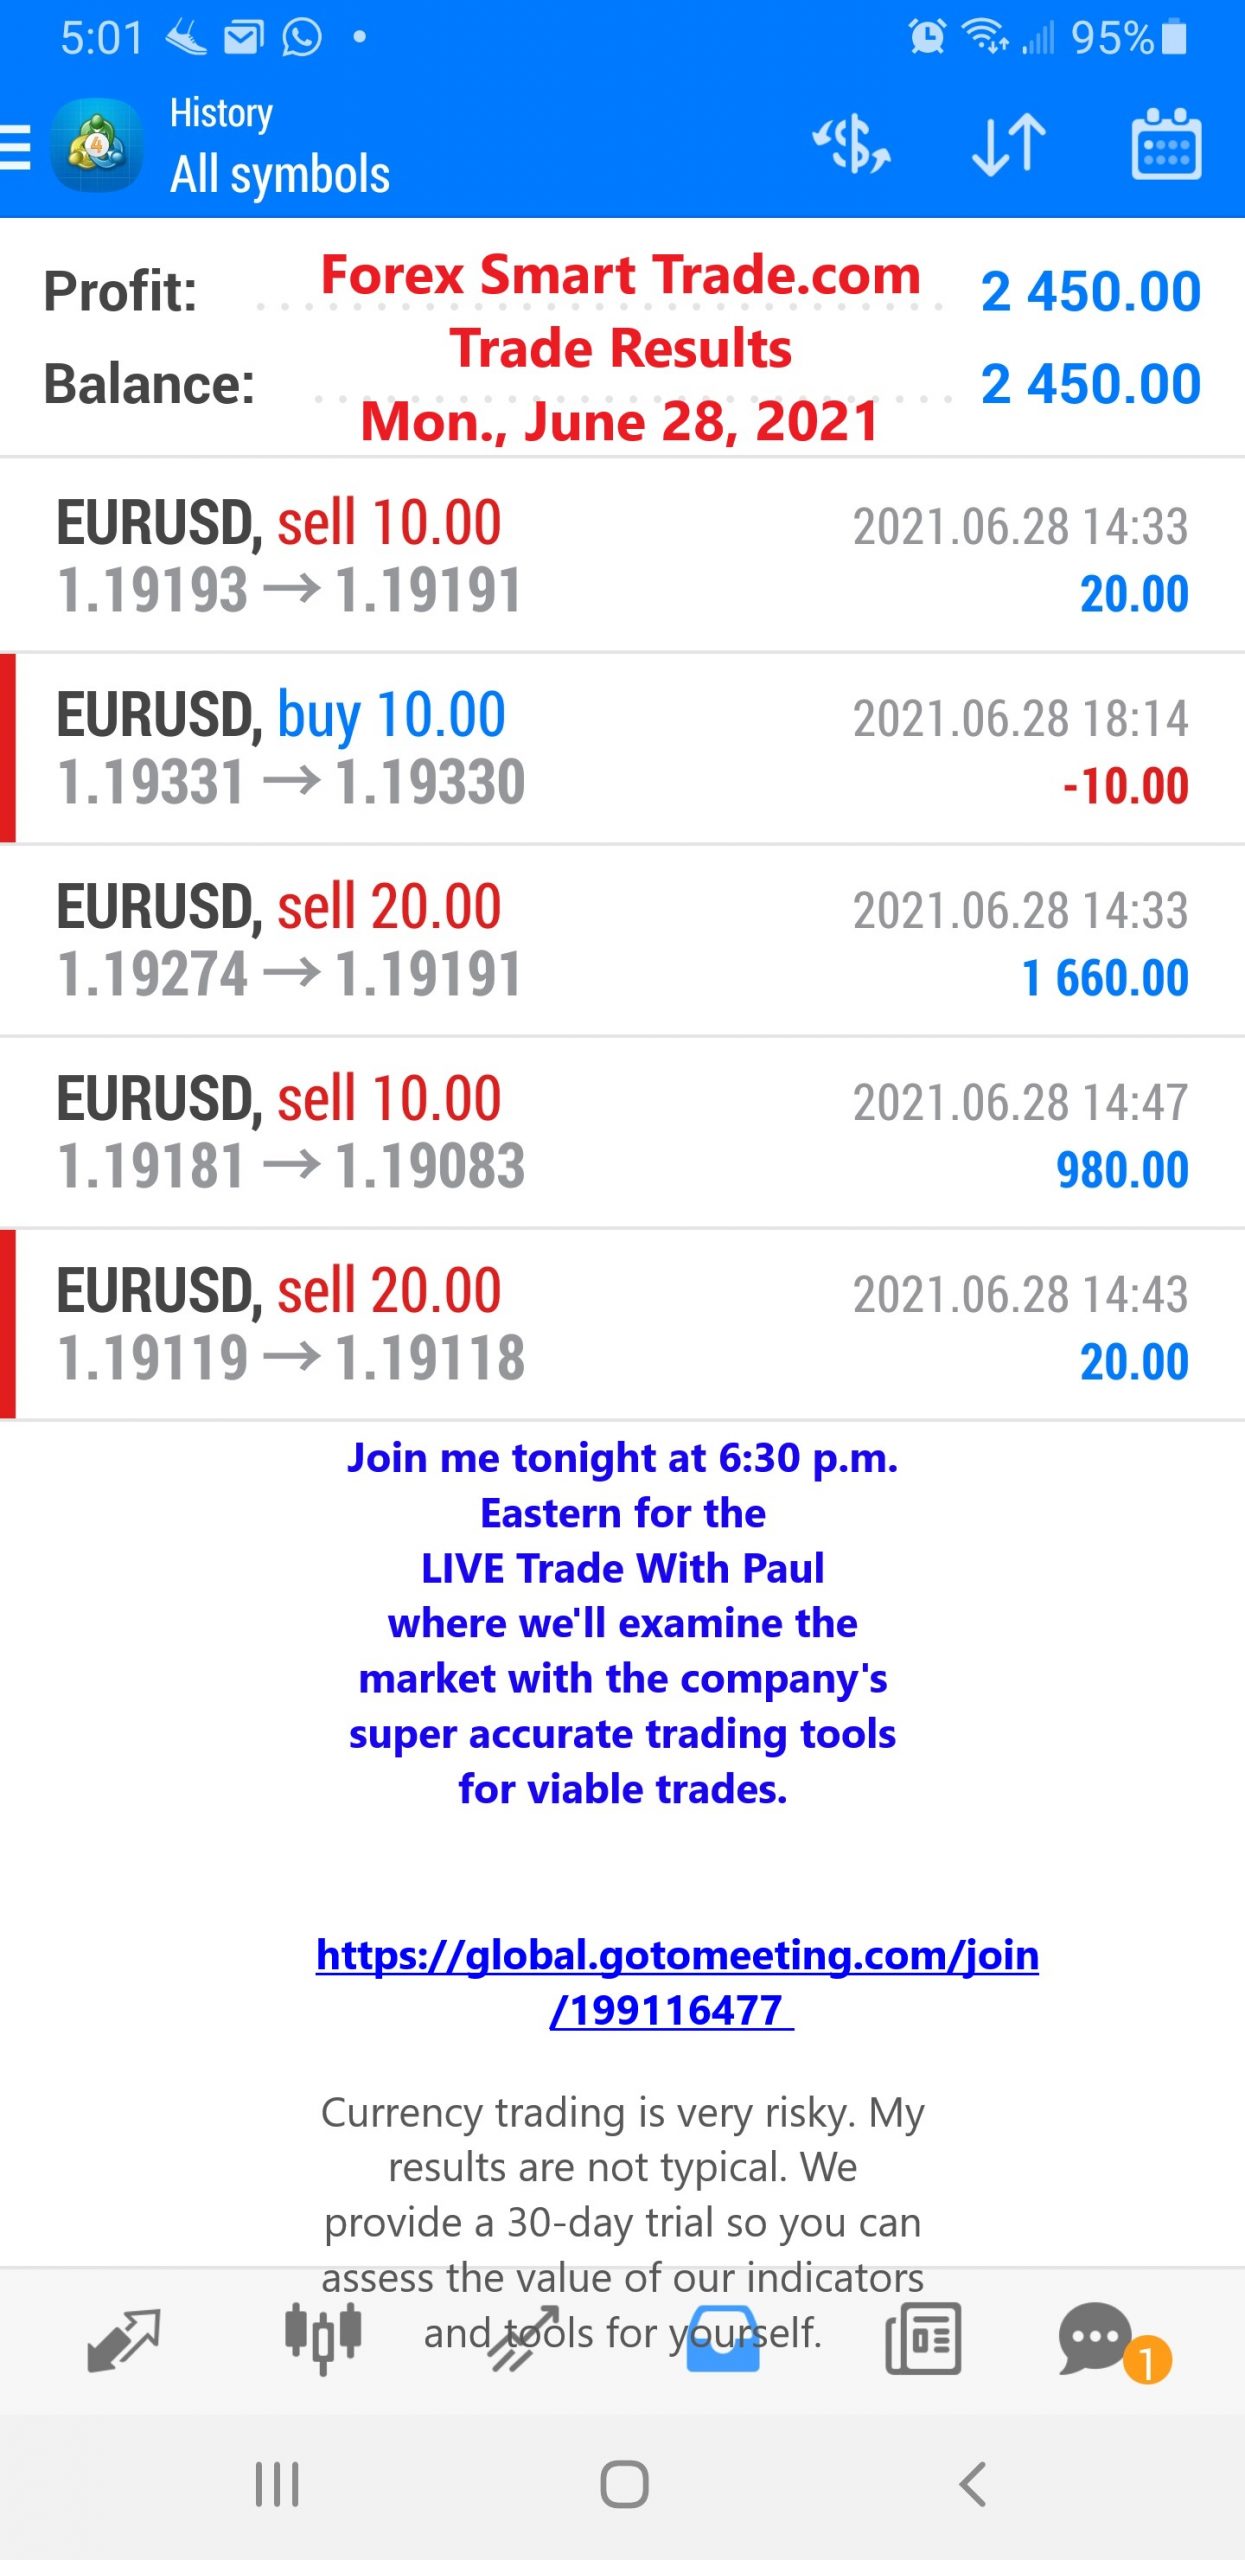 Forex Smart Trade Results June 28, 2021